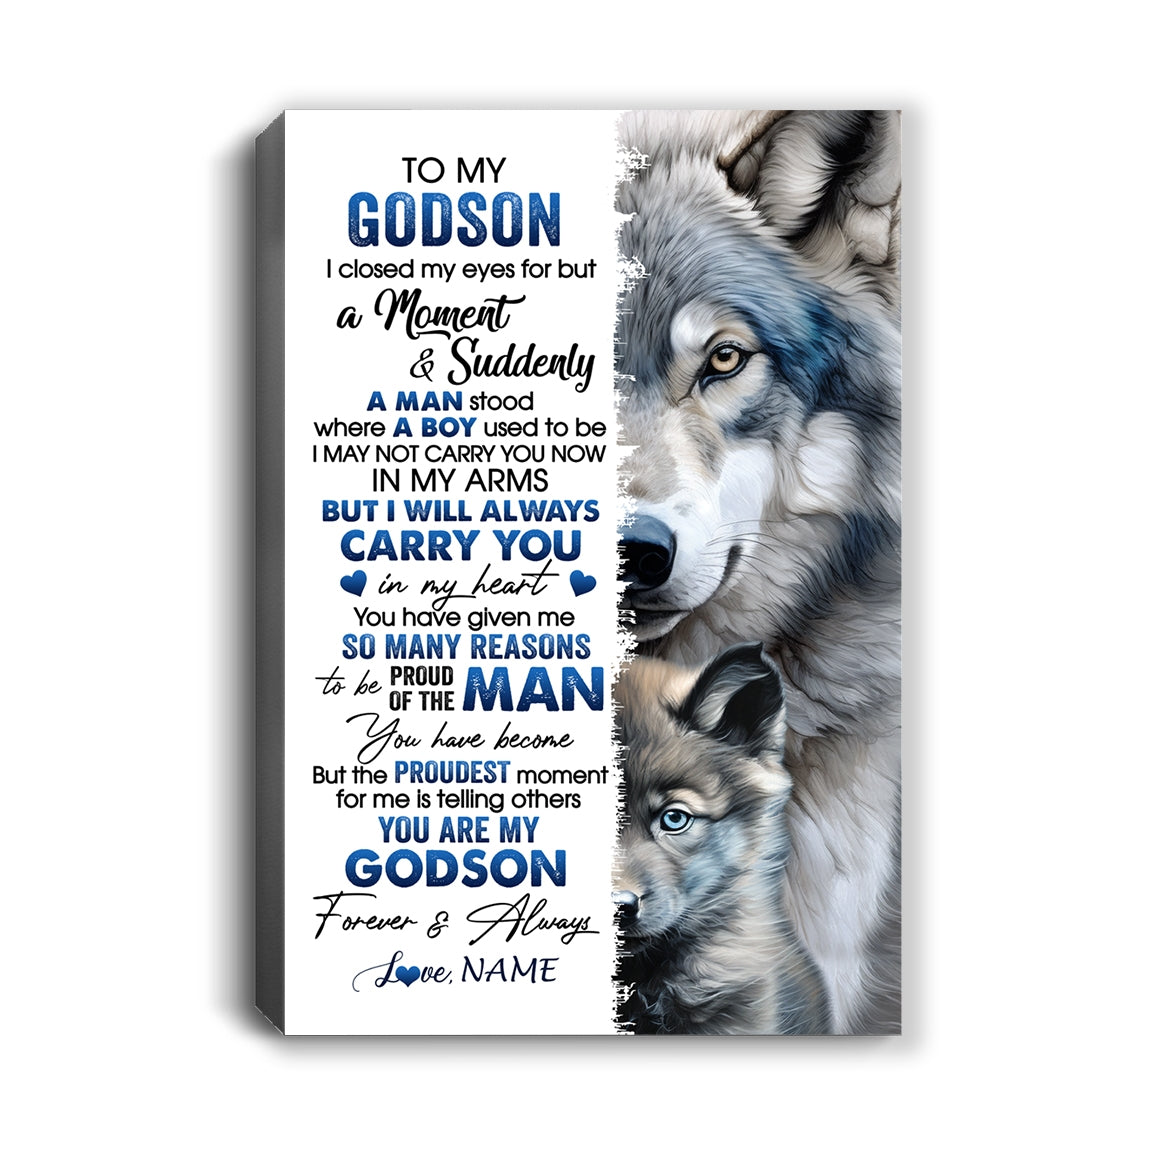 Personalized_To_My_Godson_Canvas_From_Godmother_Uncle_I_Close_My_Eyes_For_But_A_Moment_Wolf_Godson_Birthday_Gifts_Graduation_Christmas_Custom_Wall_Art_Print_Framed_Canvas_Canvas_mocku-1.jpg